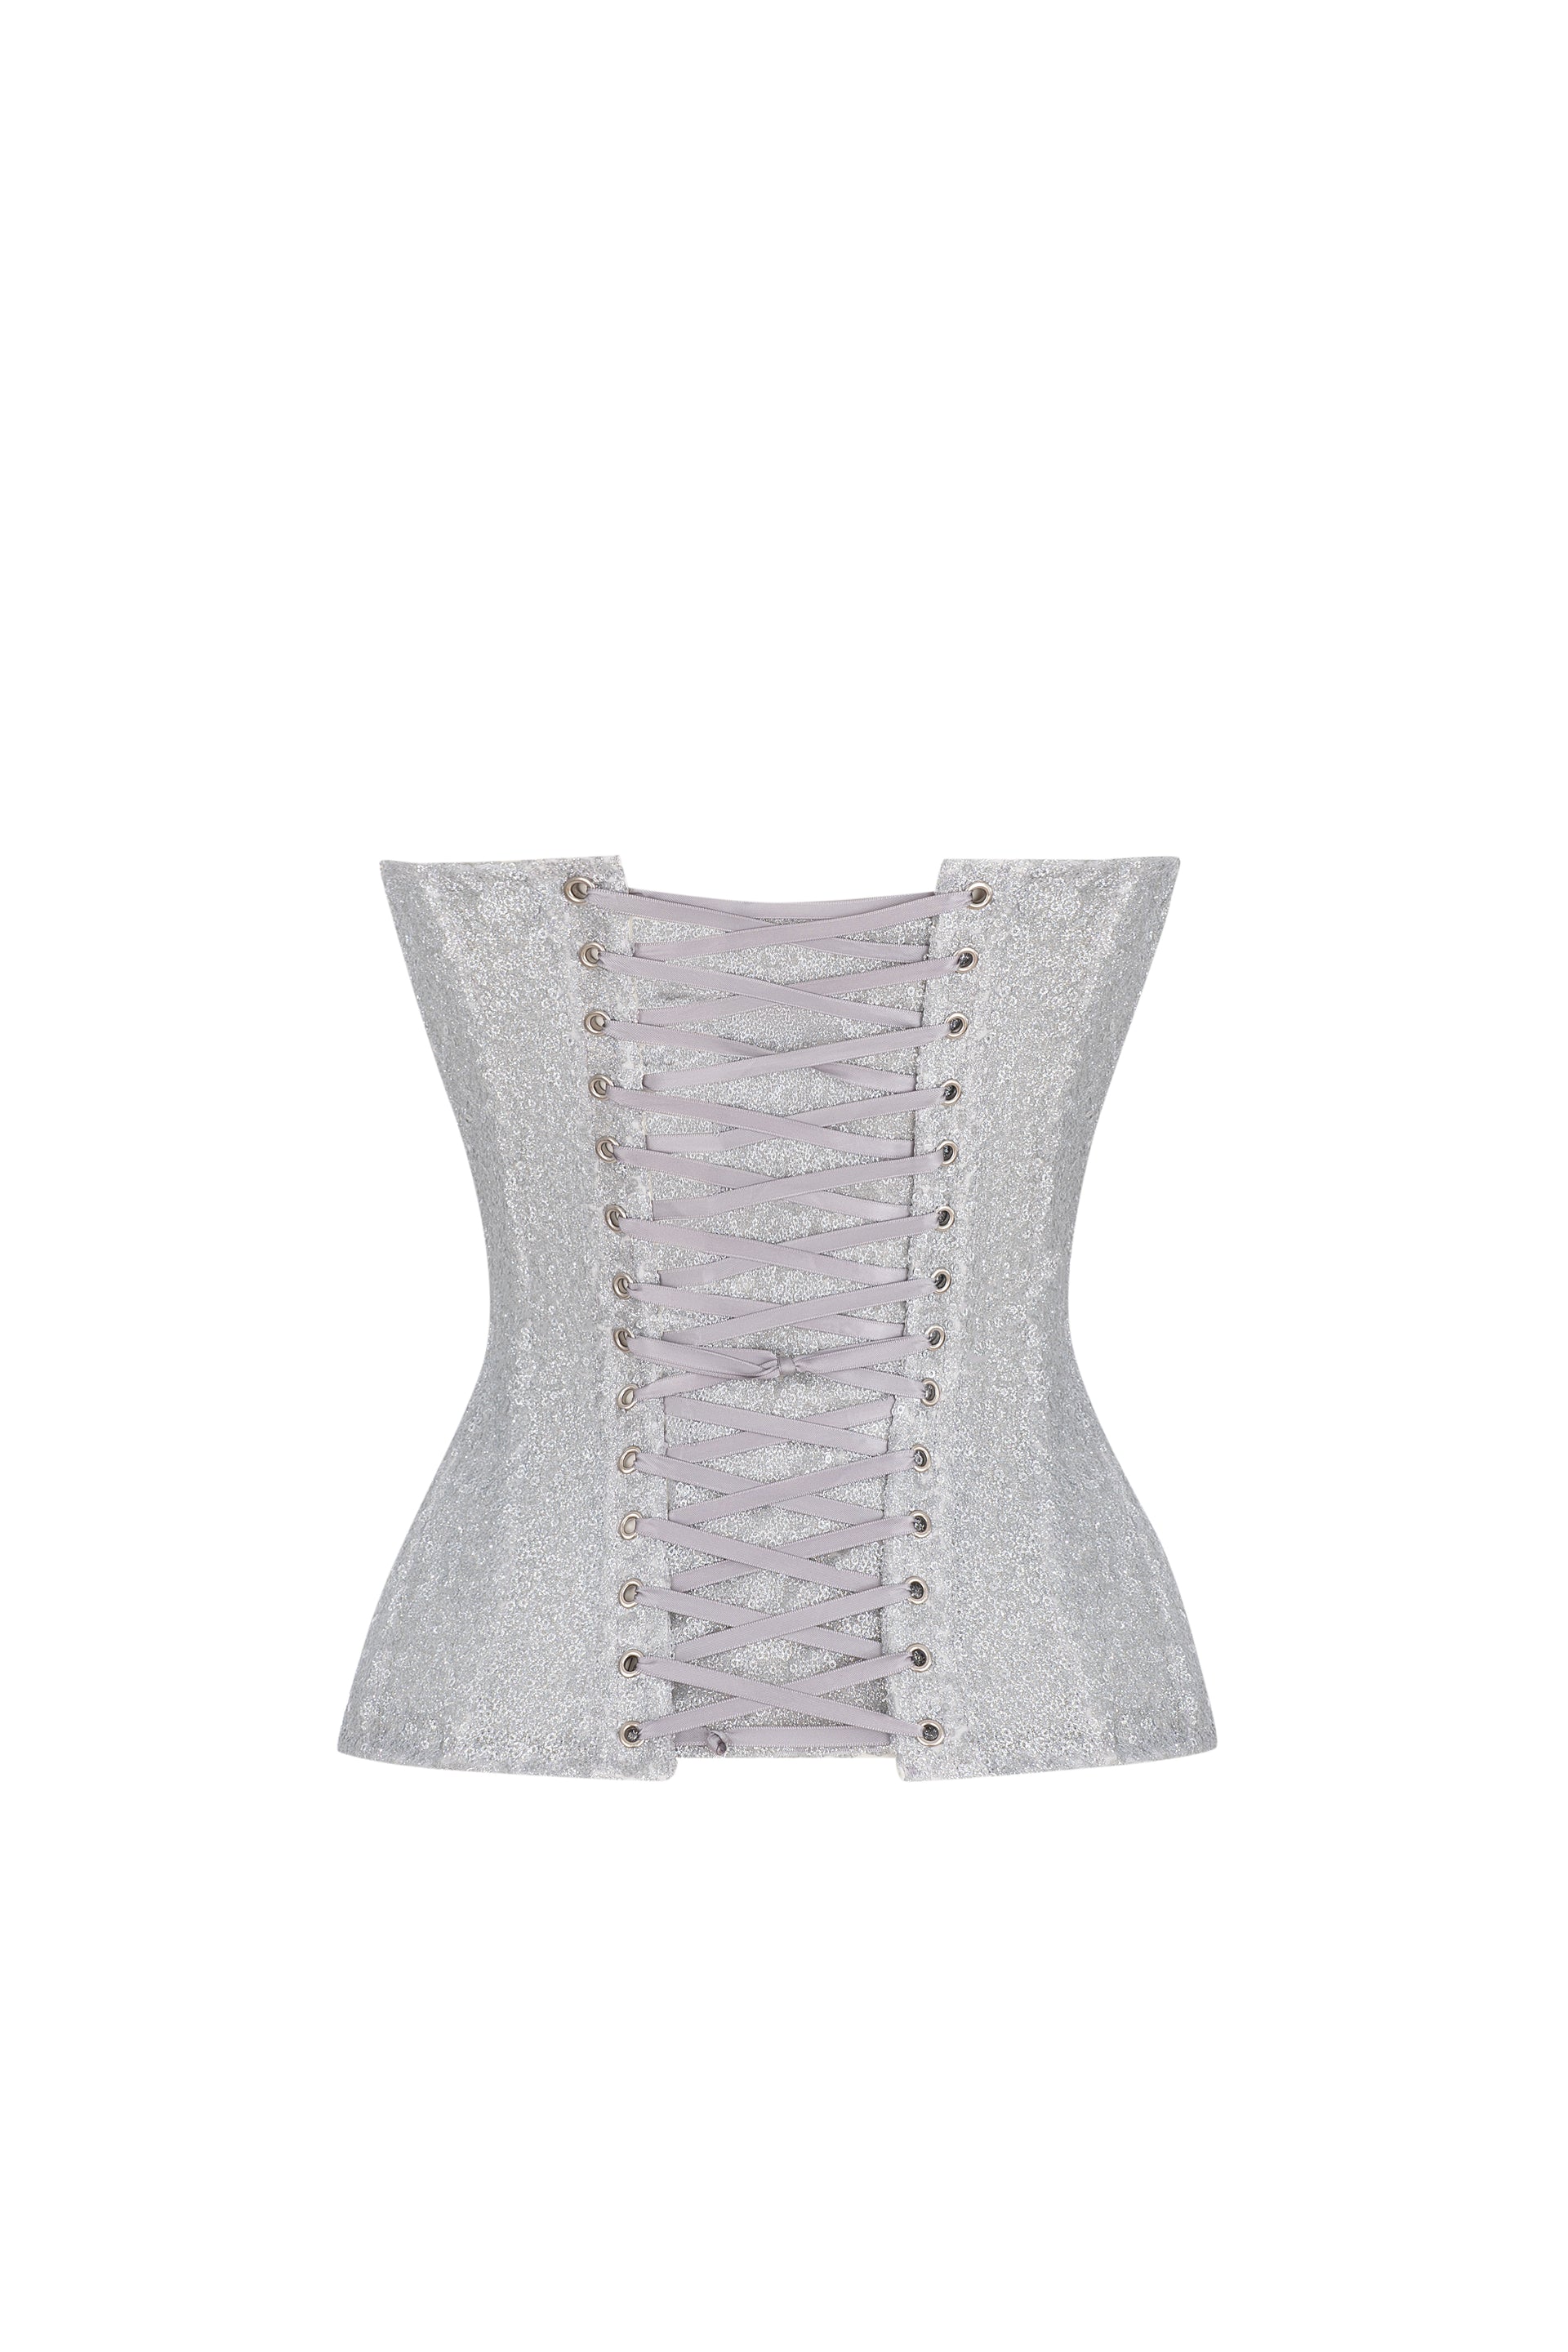 Silver sequined corset with cups